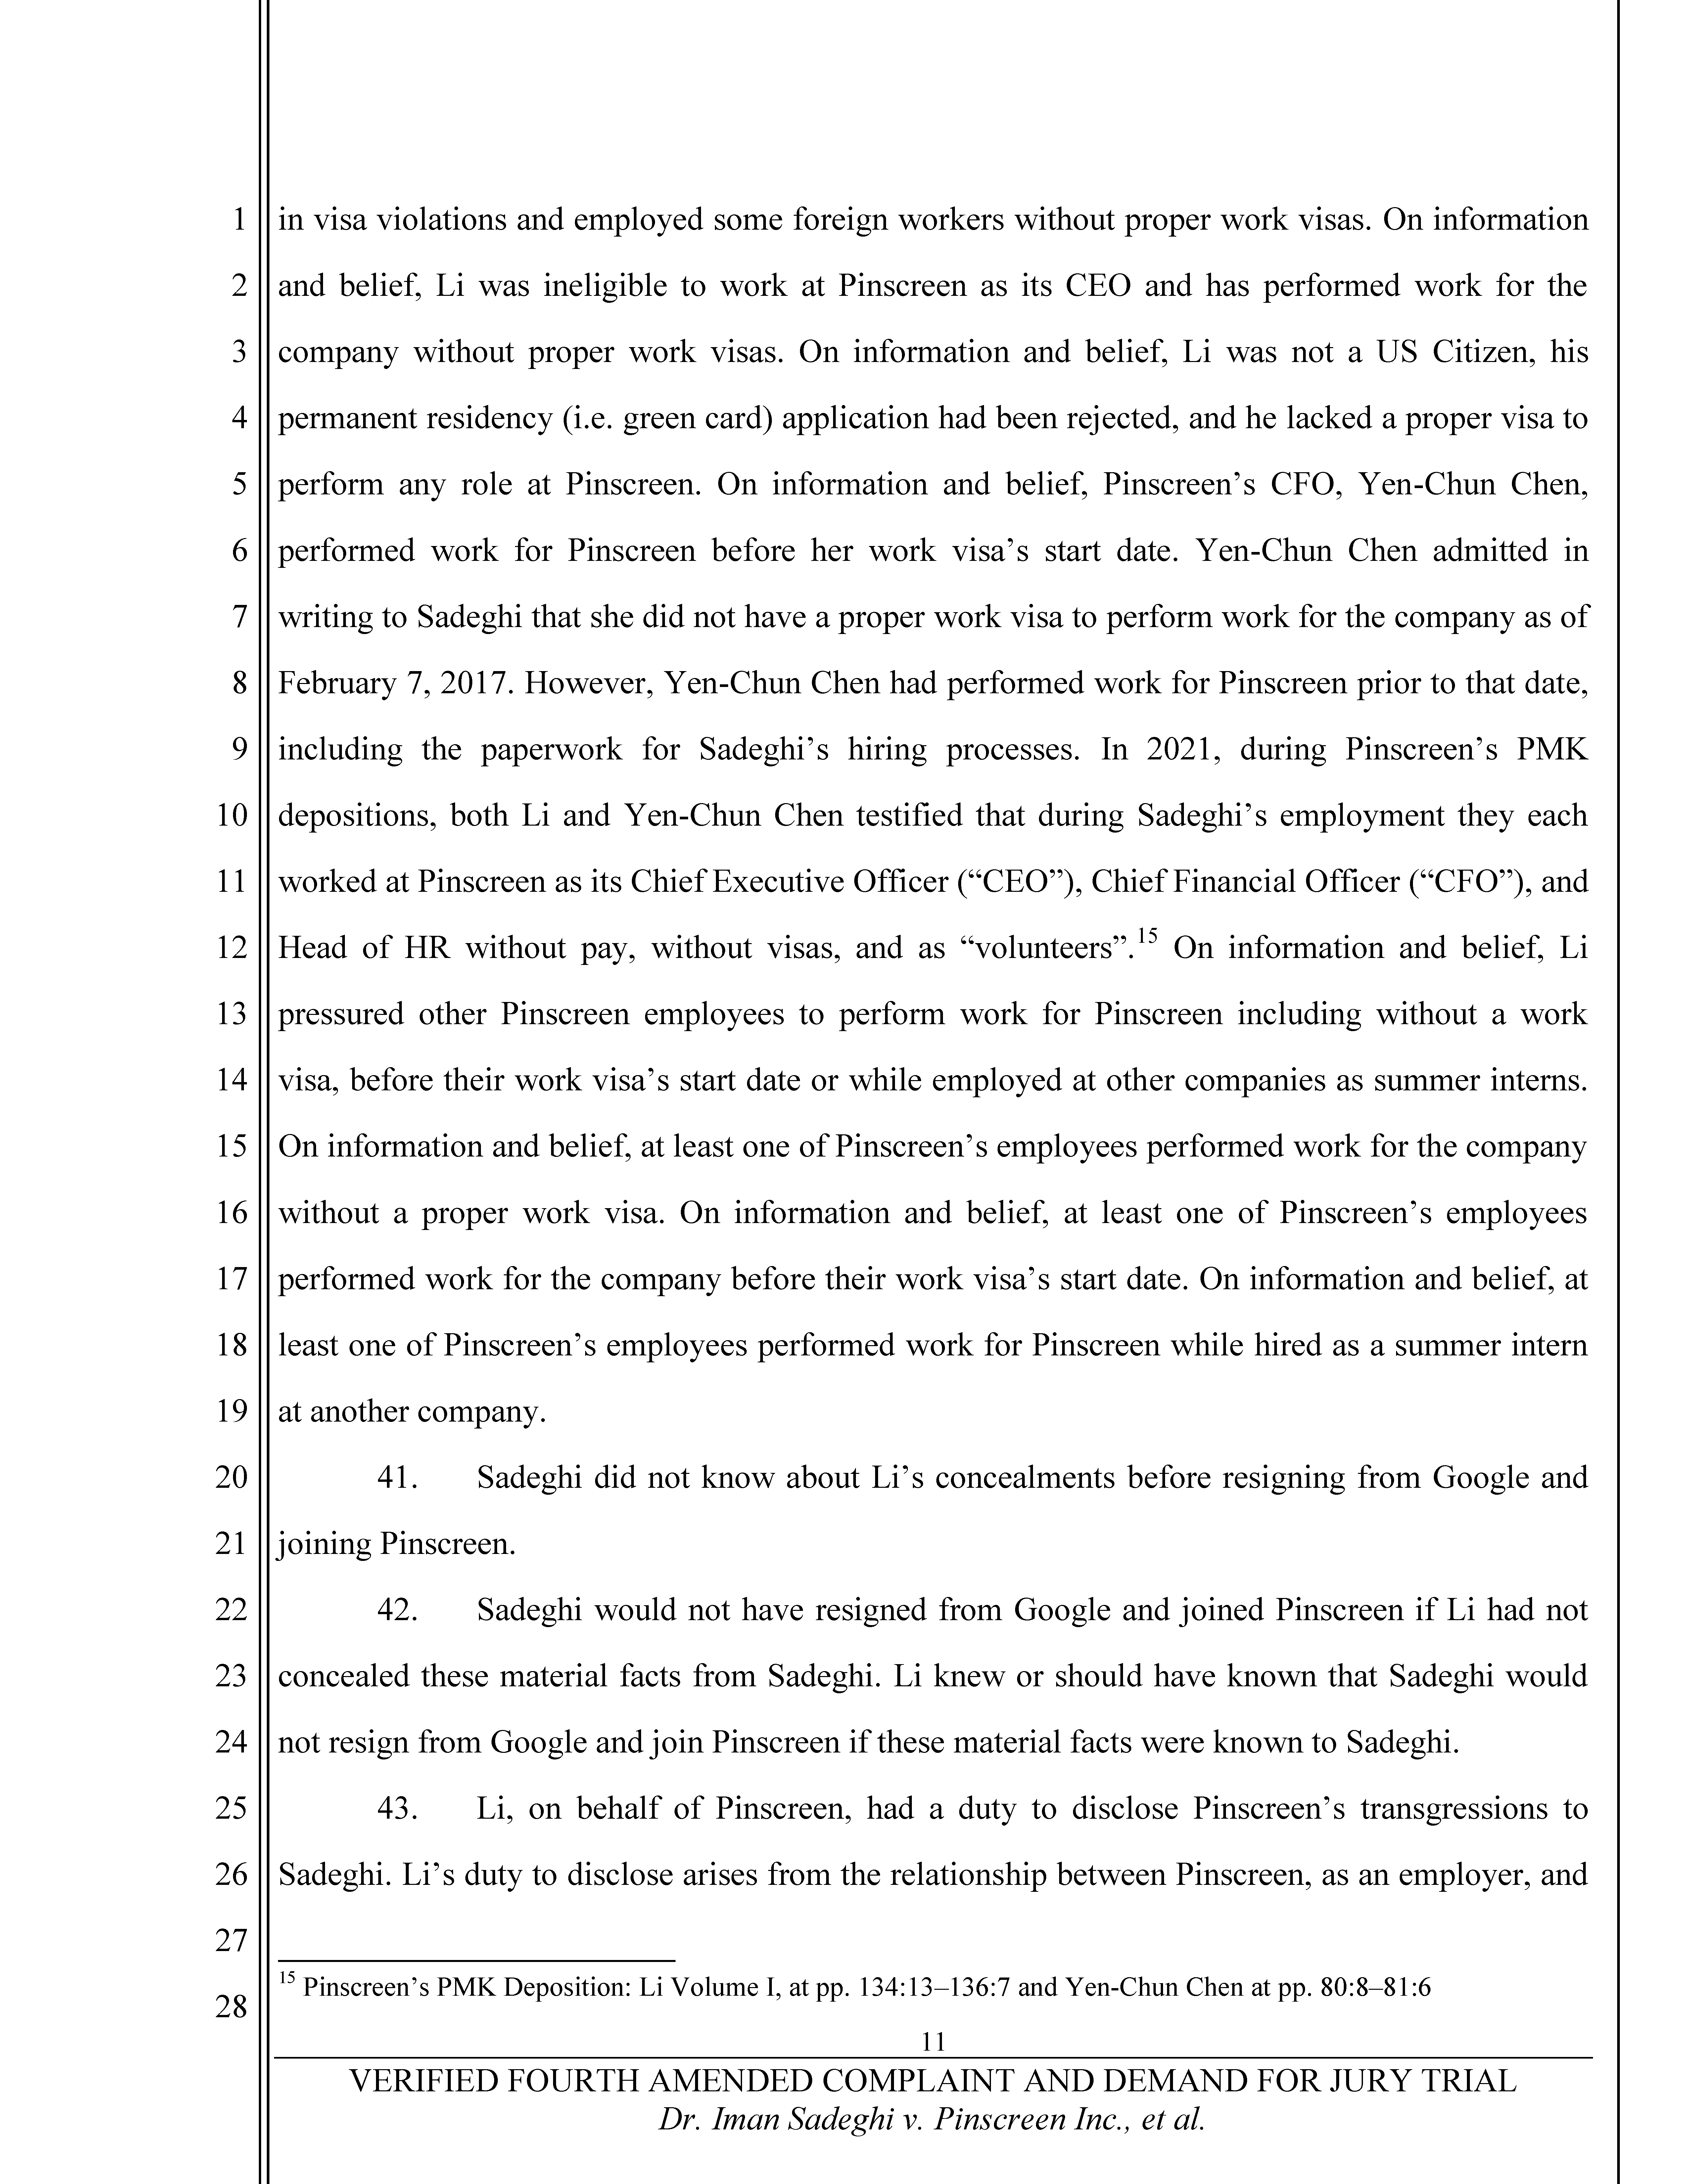 Fourth Amended Complaint (4AC) Page 12